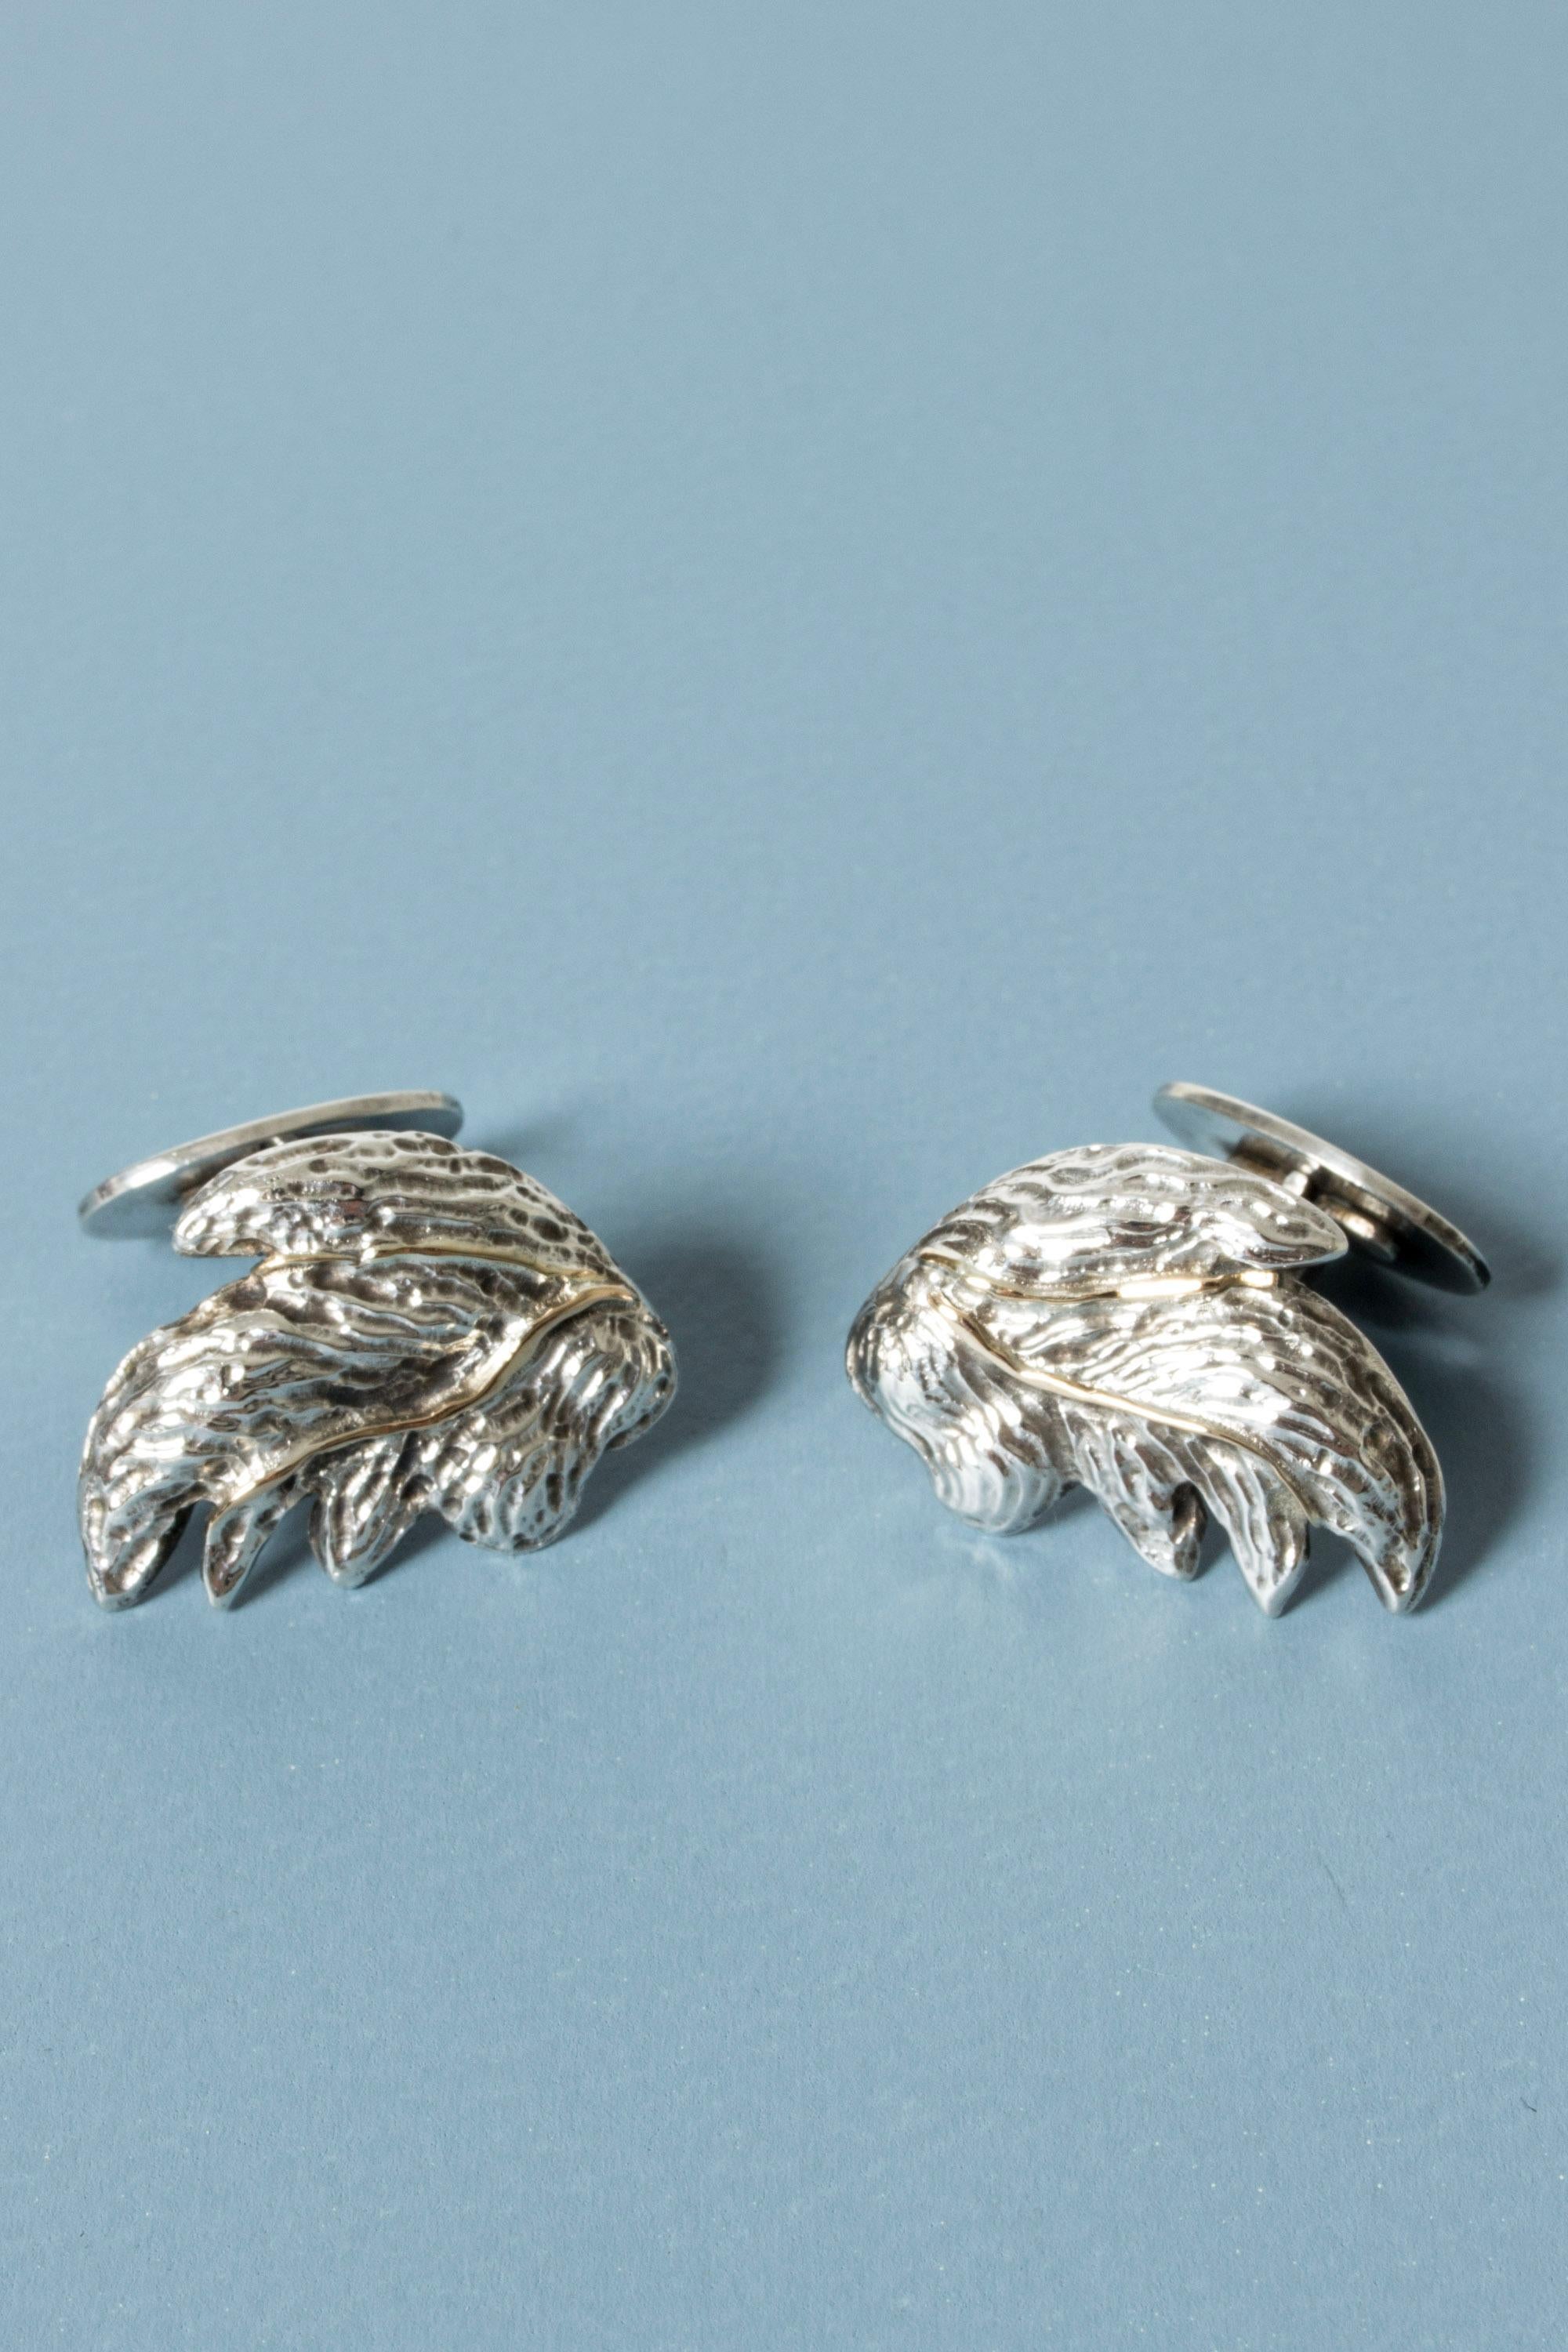 Beautiful, large silver cufflinks by Olle Ohlsson, in an organic leaf form. Lovely details with a gold vein through the center.

Olle Ohlsson is a Swedish silversmith with a unique artistic expression that he has consistently strived to evolve and